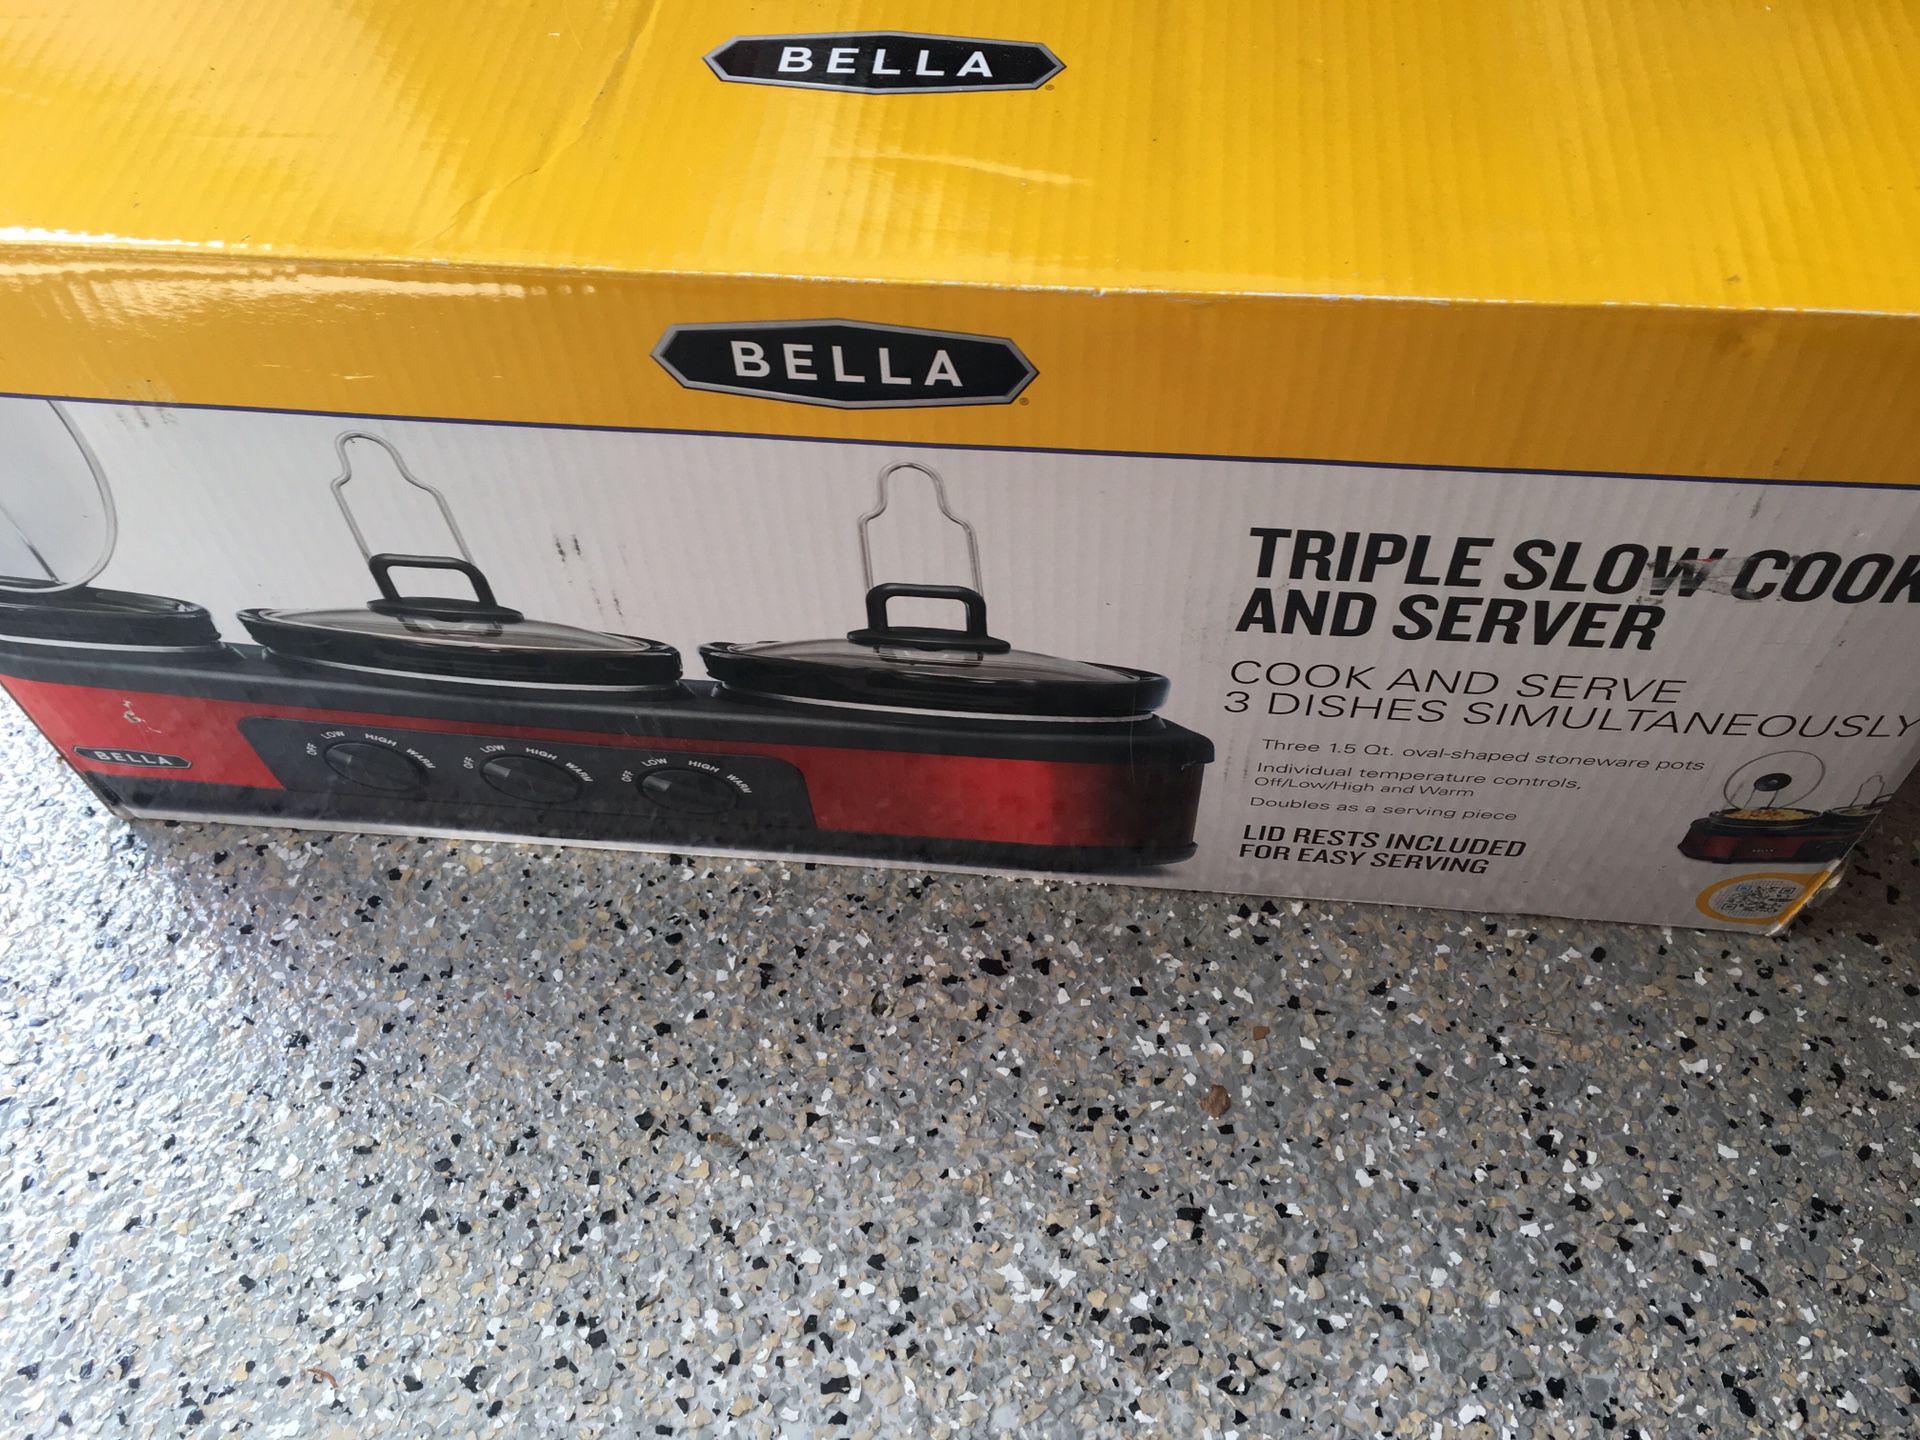 Bella Triple Slow Cooker. Never used.